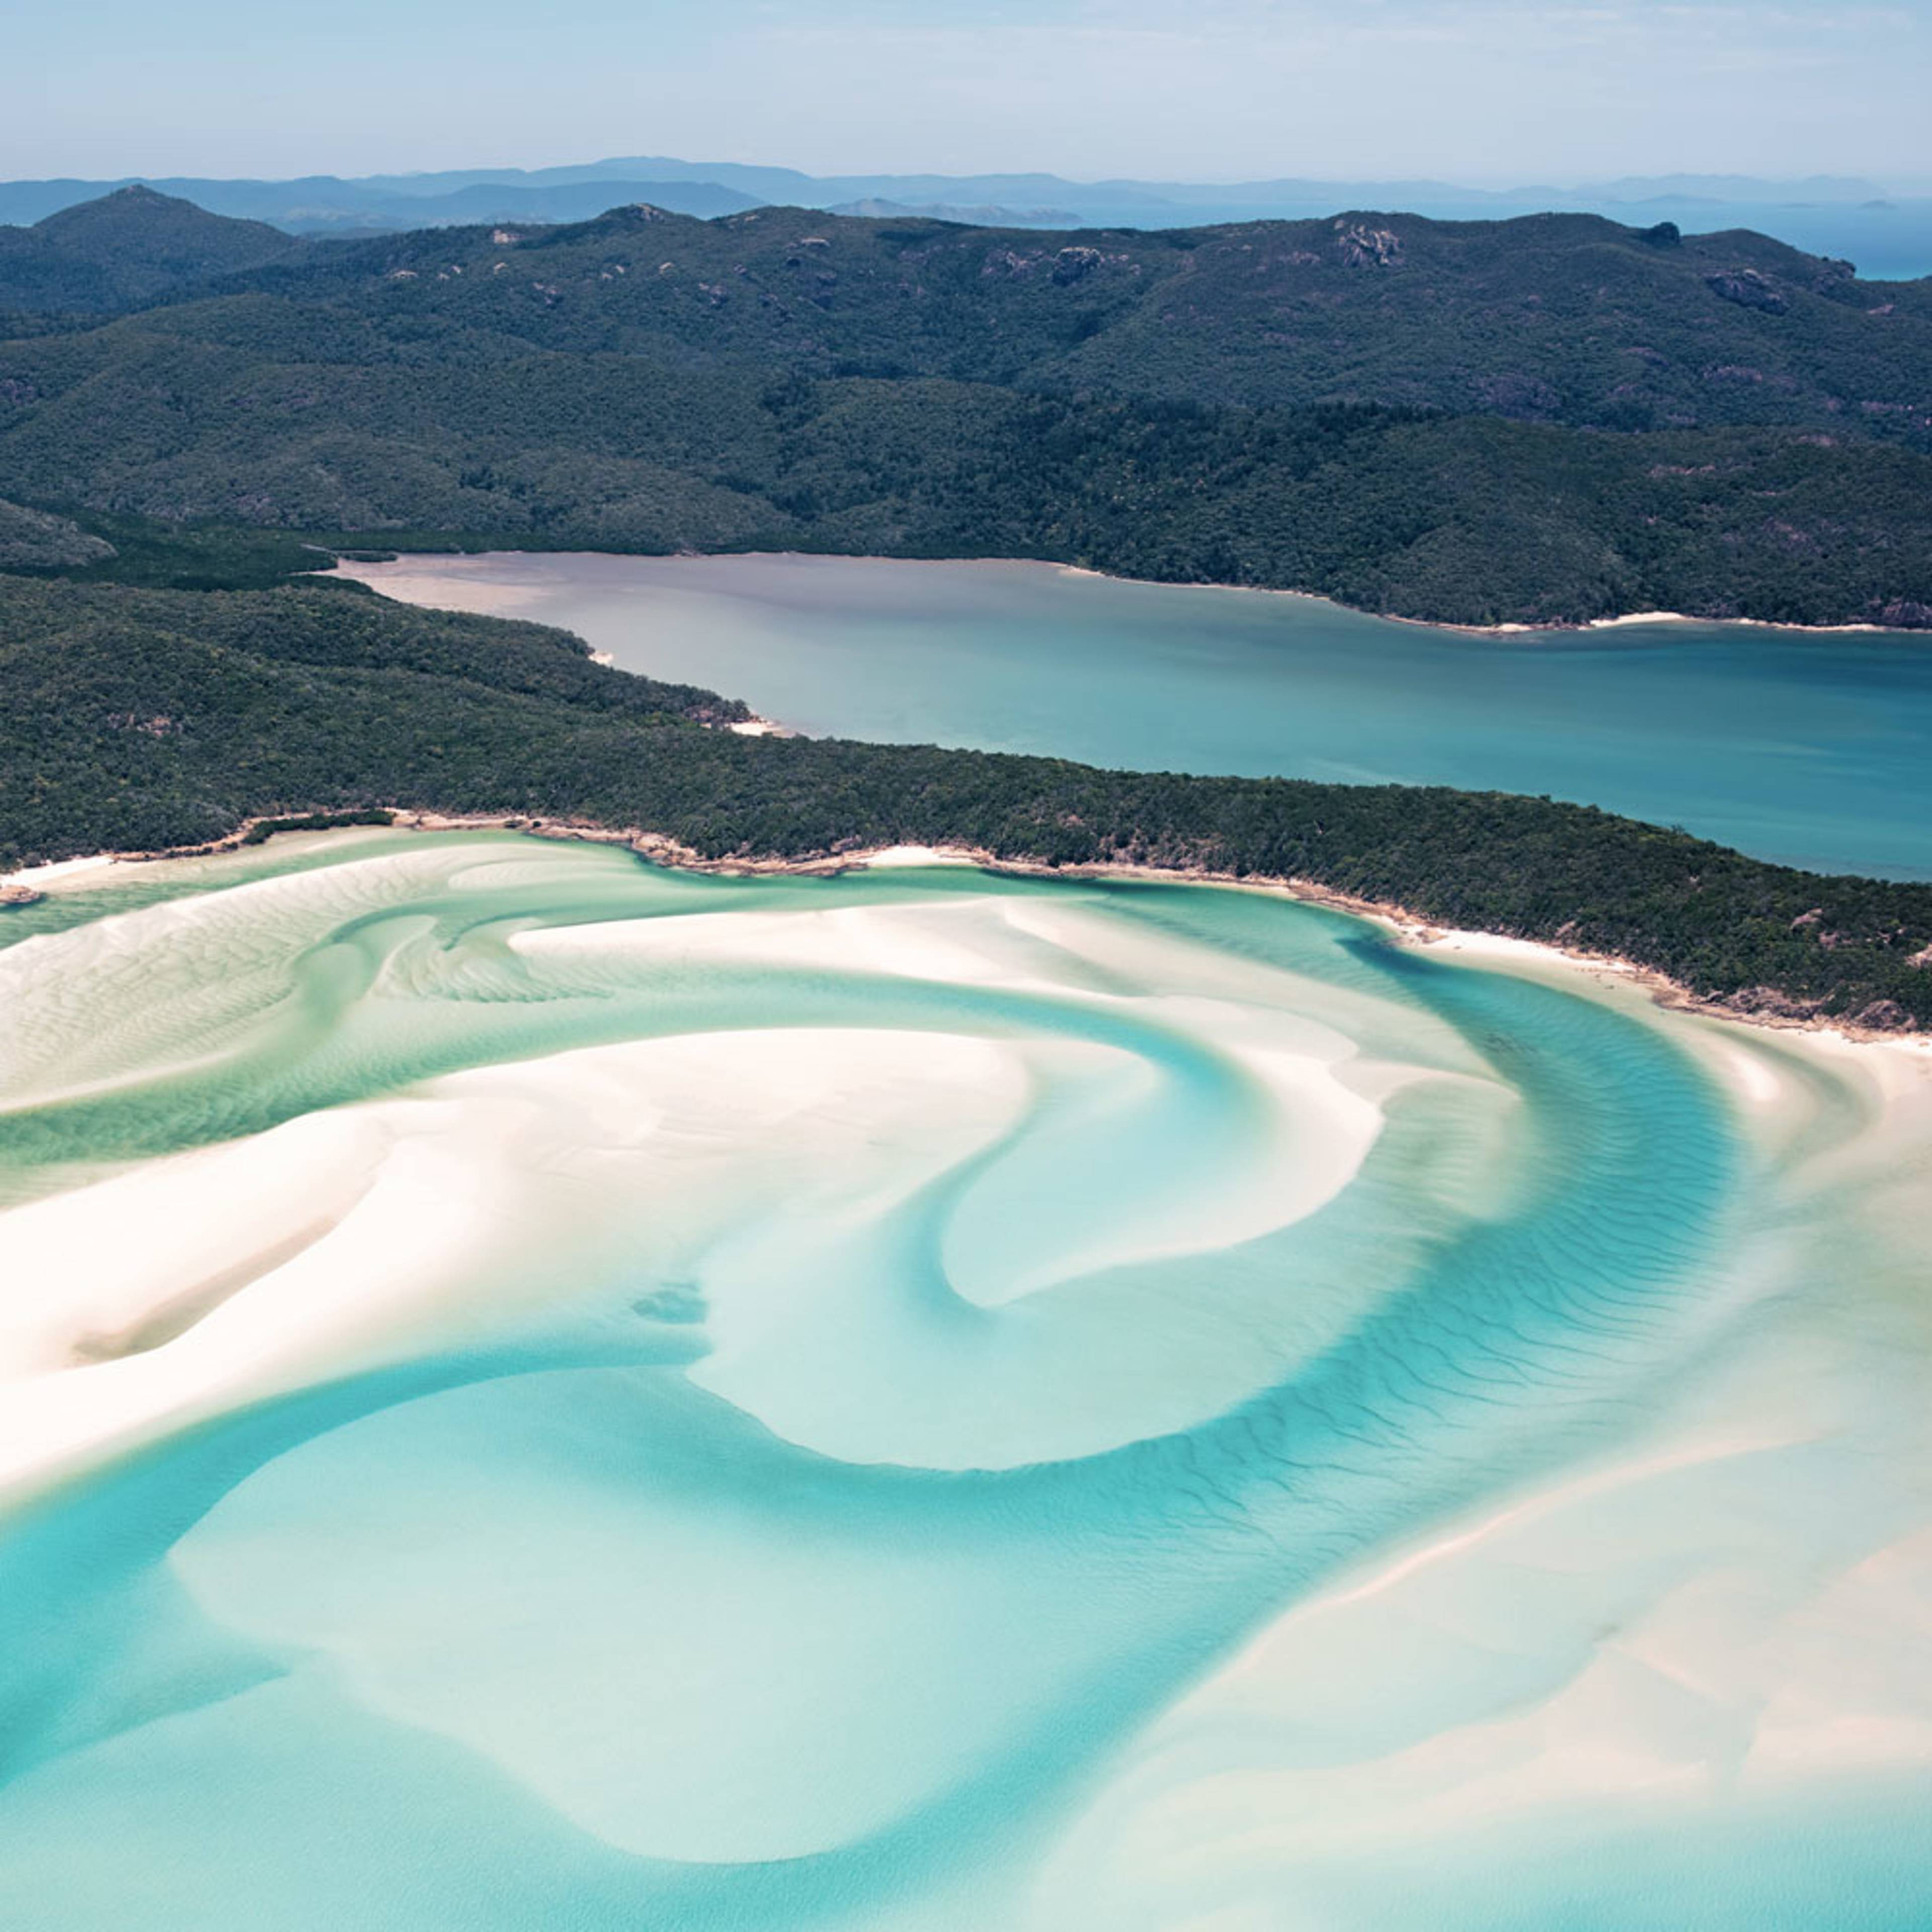 Design your perfect trip to Australia's beaches with a local expert